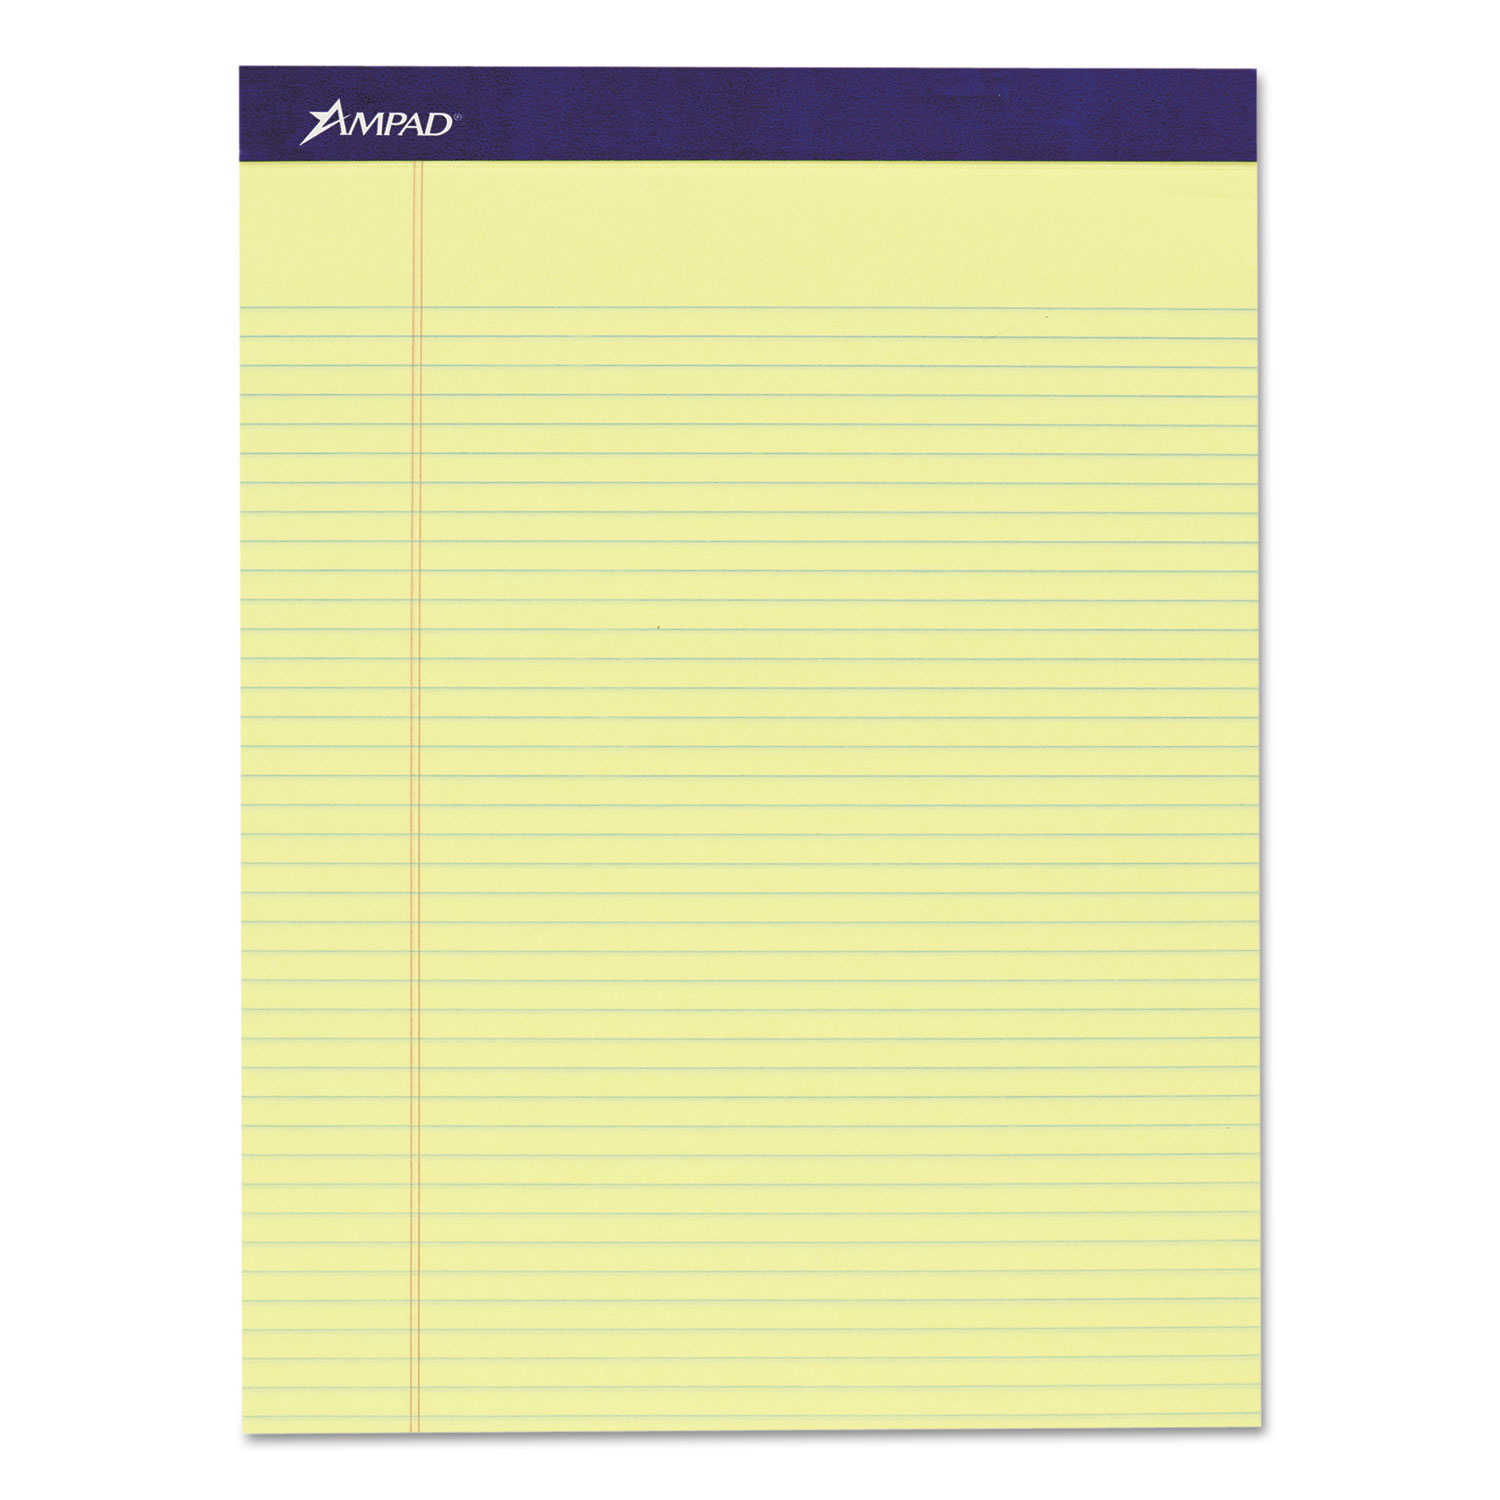  Ampad 20-215 Legal Ruled Pads, Narrow Rule, 8.5 x 11.75, Canary, 50 Sheets, 4/Pack (TOP20215) 